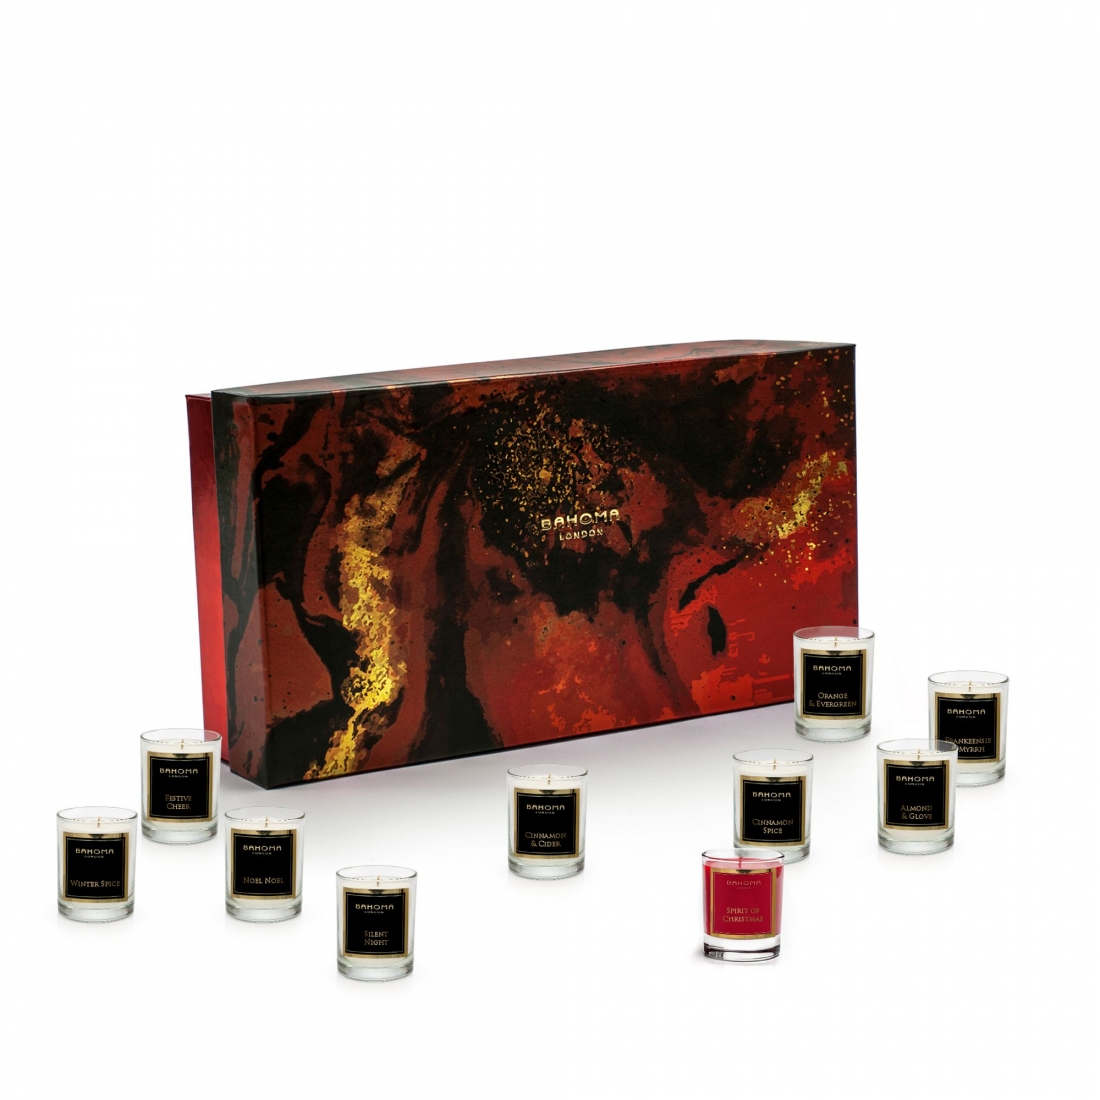 'Luxurious Christmas Discovery' Gift Set - 10 Units